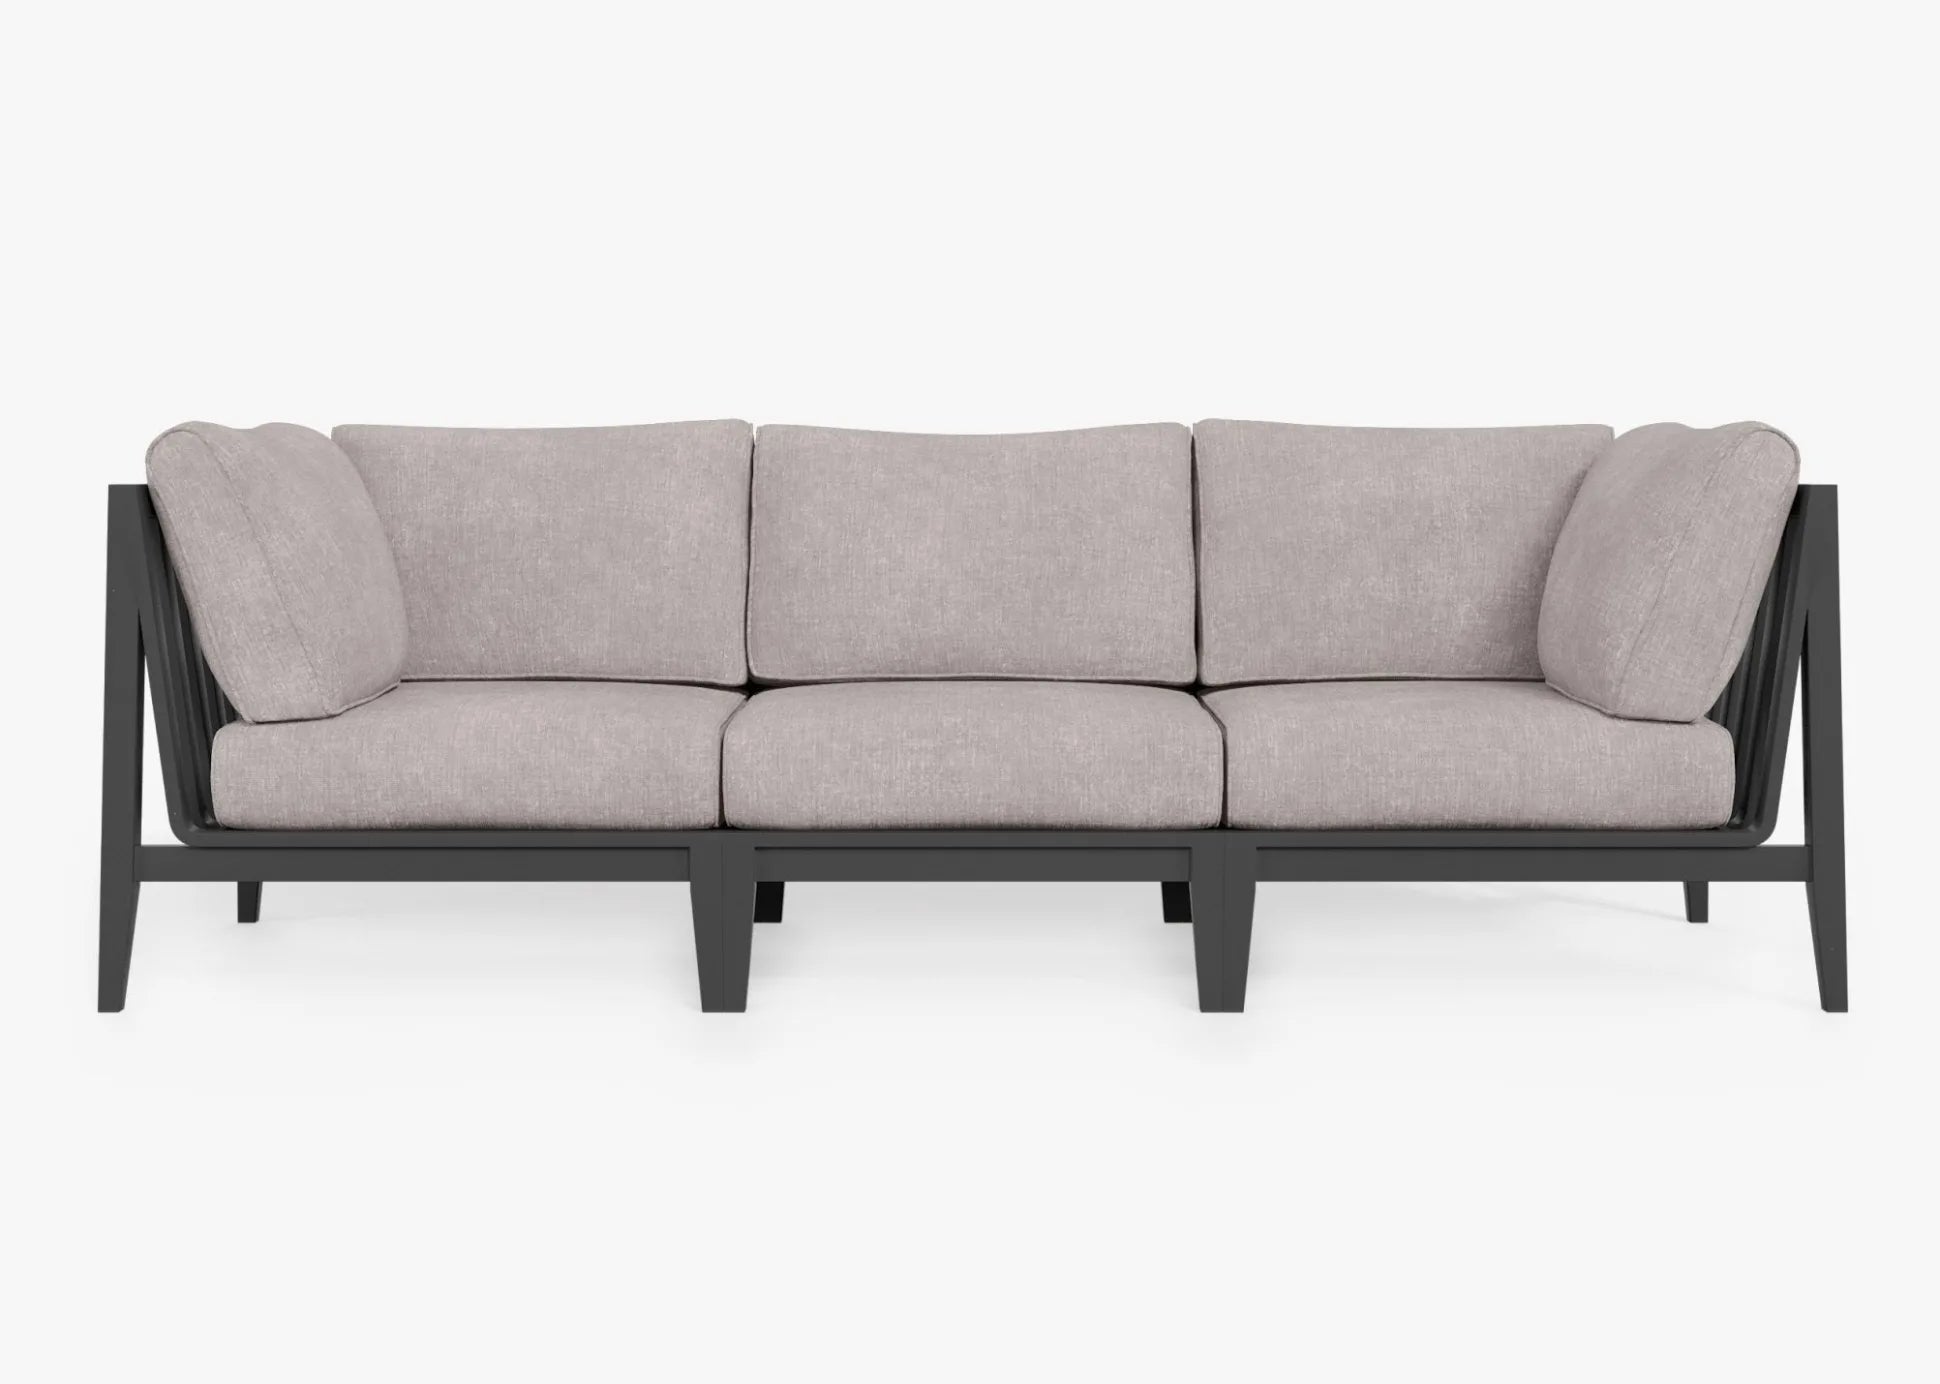 Live Outer 98" Charcoal Aluminum Outdoor 3-Seat Sofa With Sandstone Gray Cushion